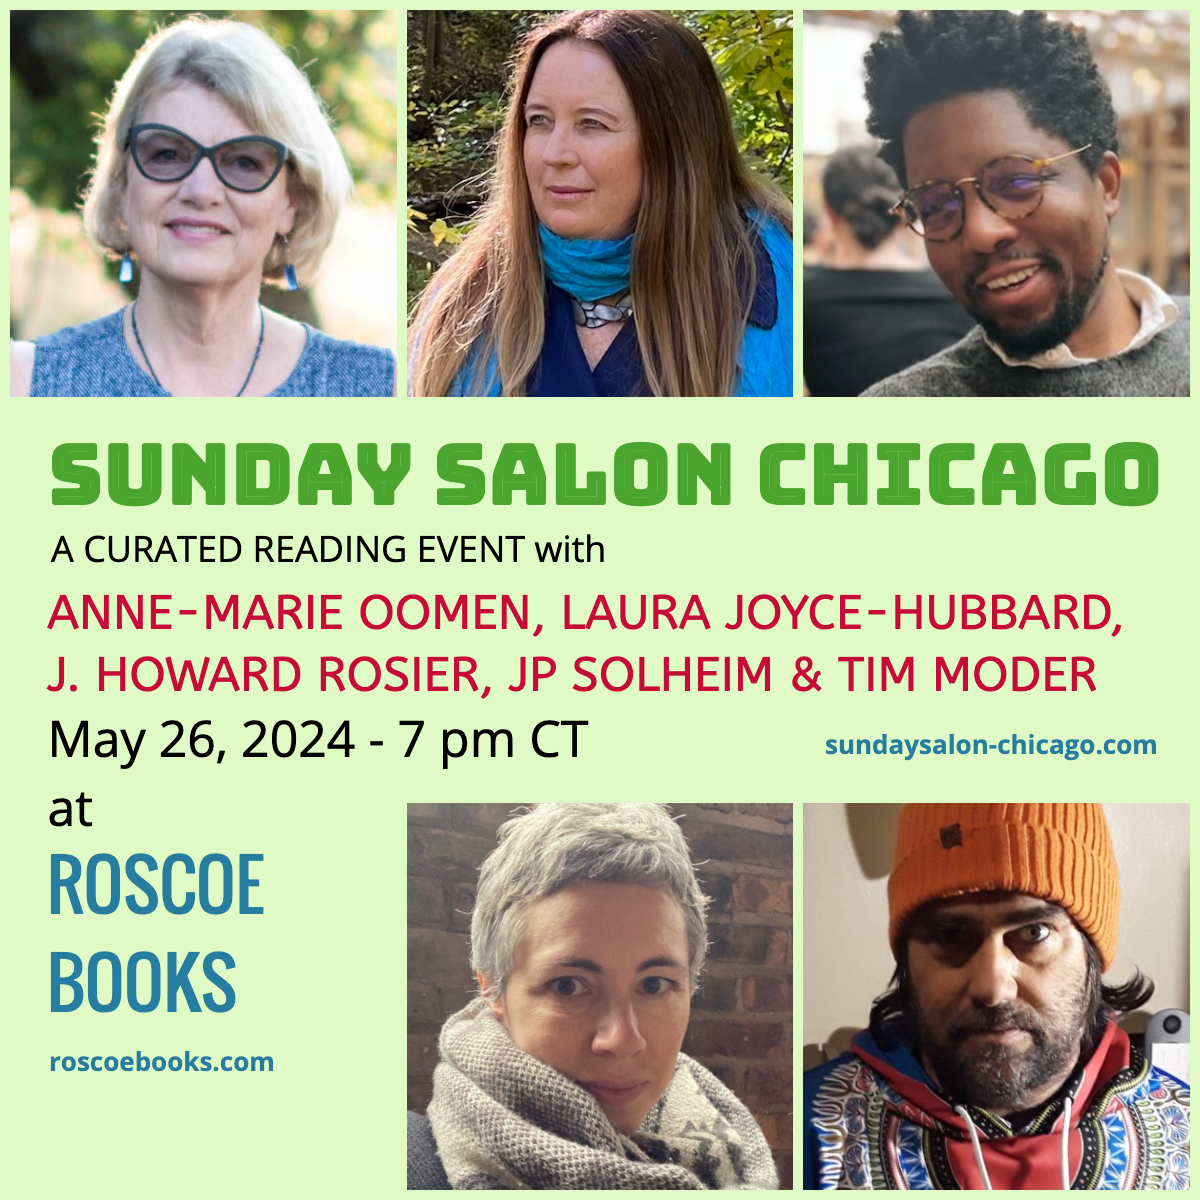 Mark your calendars! Sunday Salon Chicago happens @RoscoeBooks on May 26, 2024 at 7 pm CT, featuring @oomen_anne, @laurajoyhub, J. Howard Rosier, JP Solheim, & @ModerTim. Hope to see you! Site update coming soon 💚👏❤️‍🔥🌷🌎🌞 #WritingCommunity